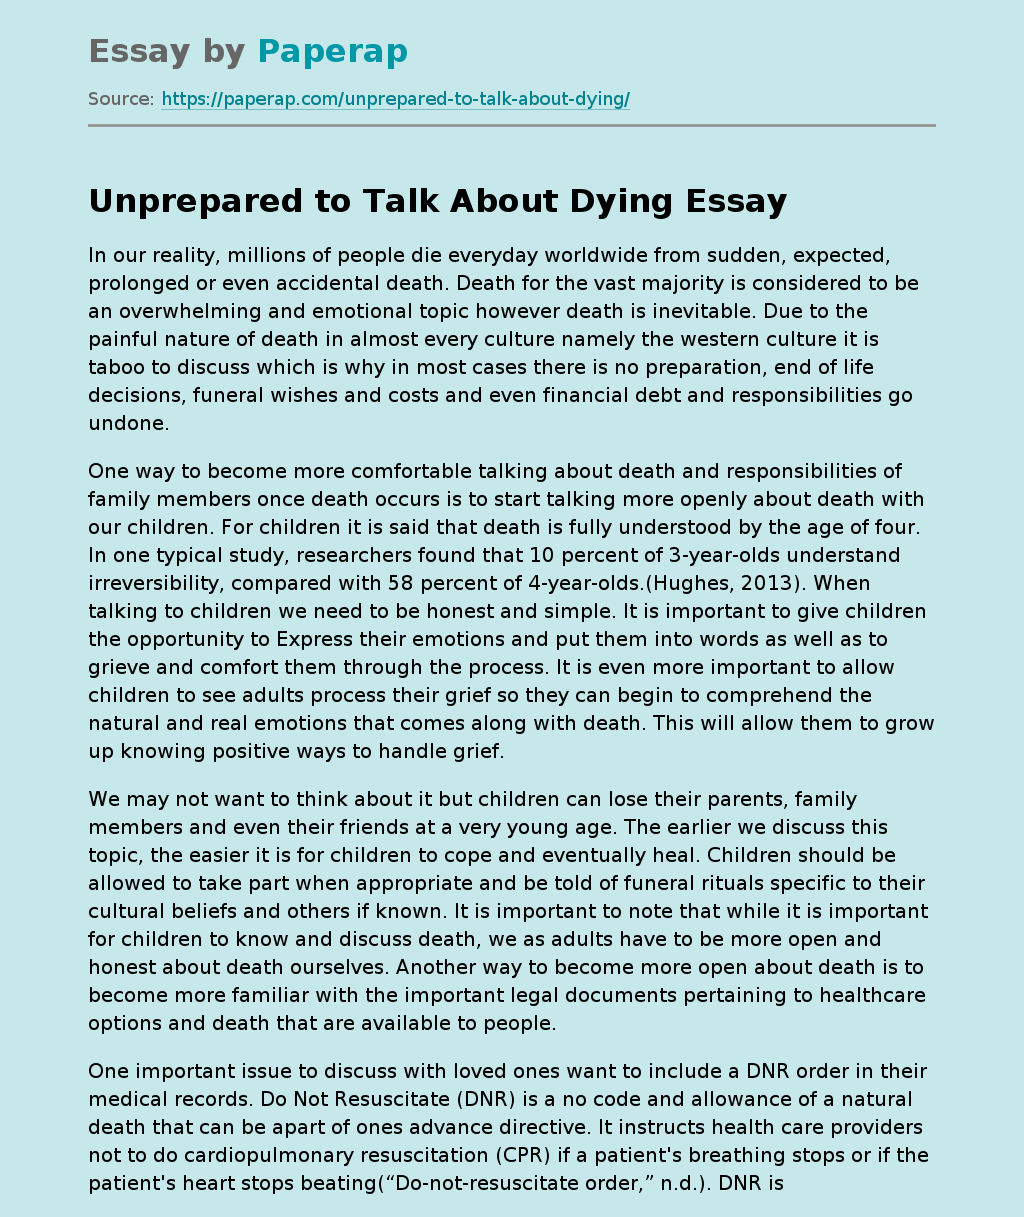 Unprepared to Talk About Dying